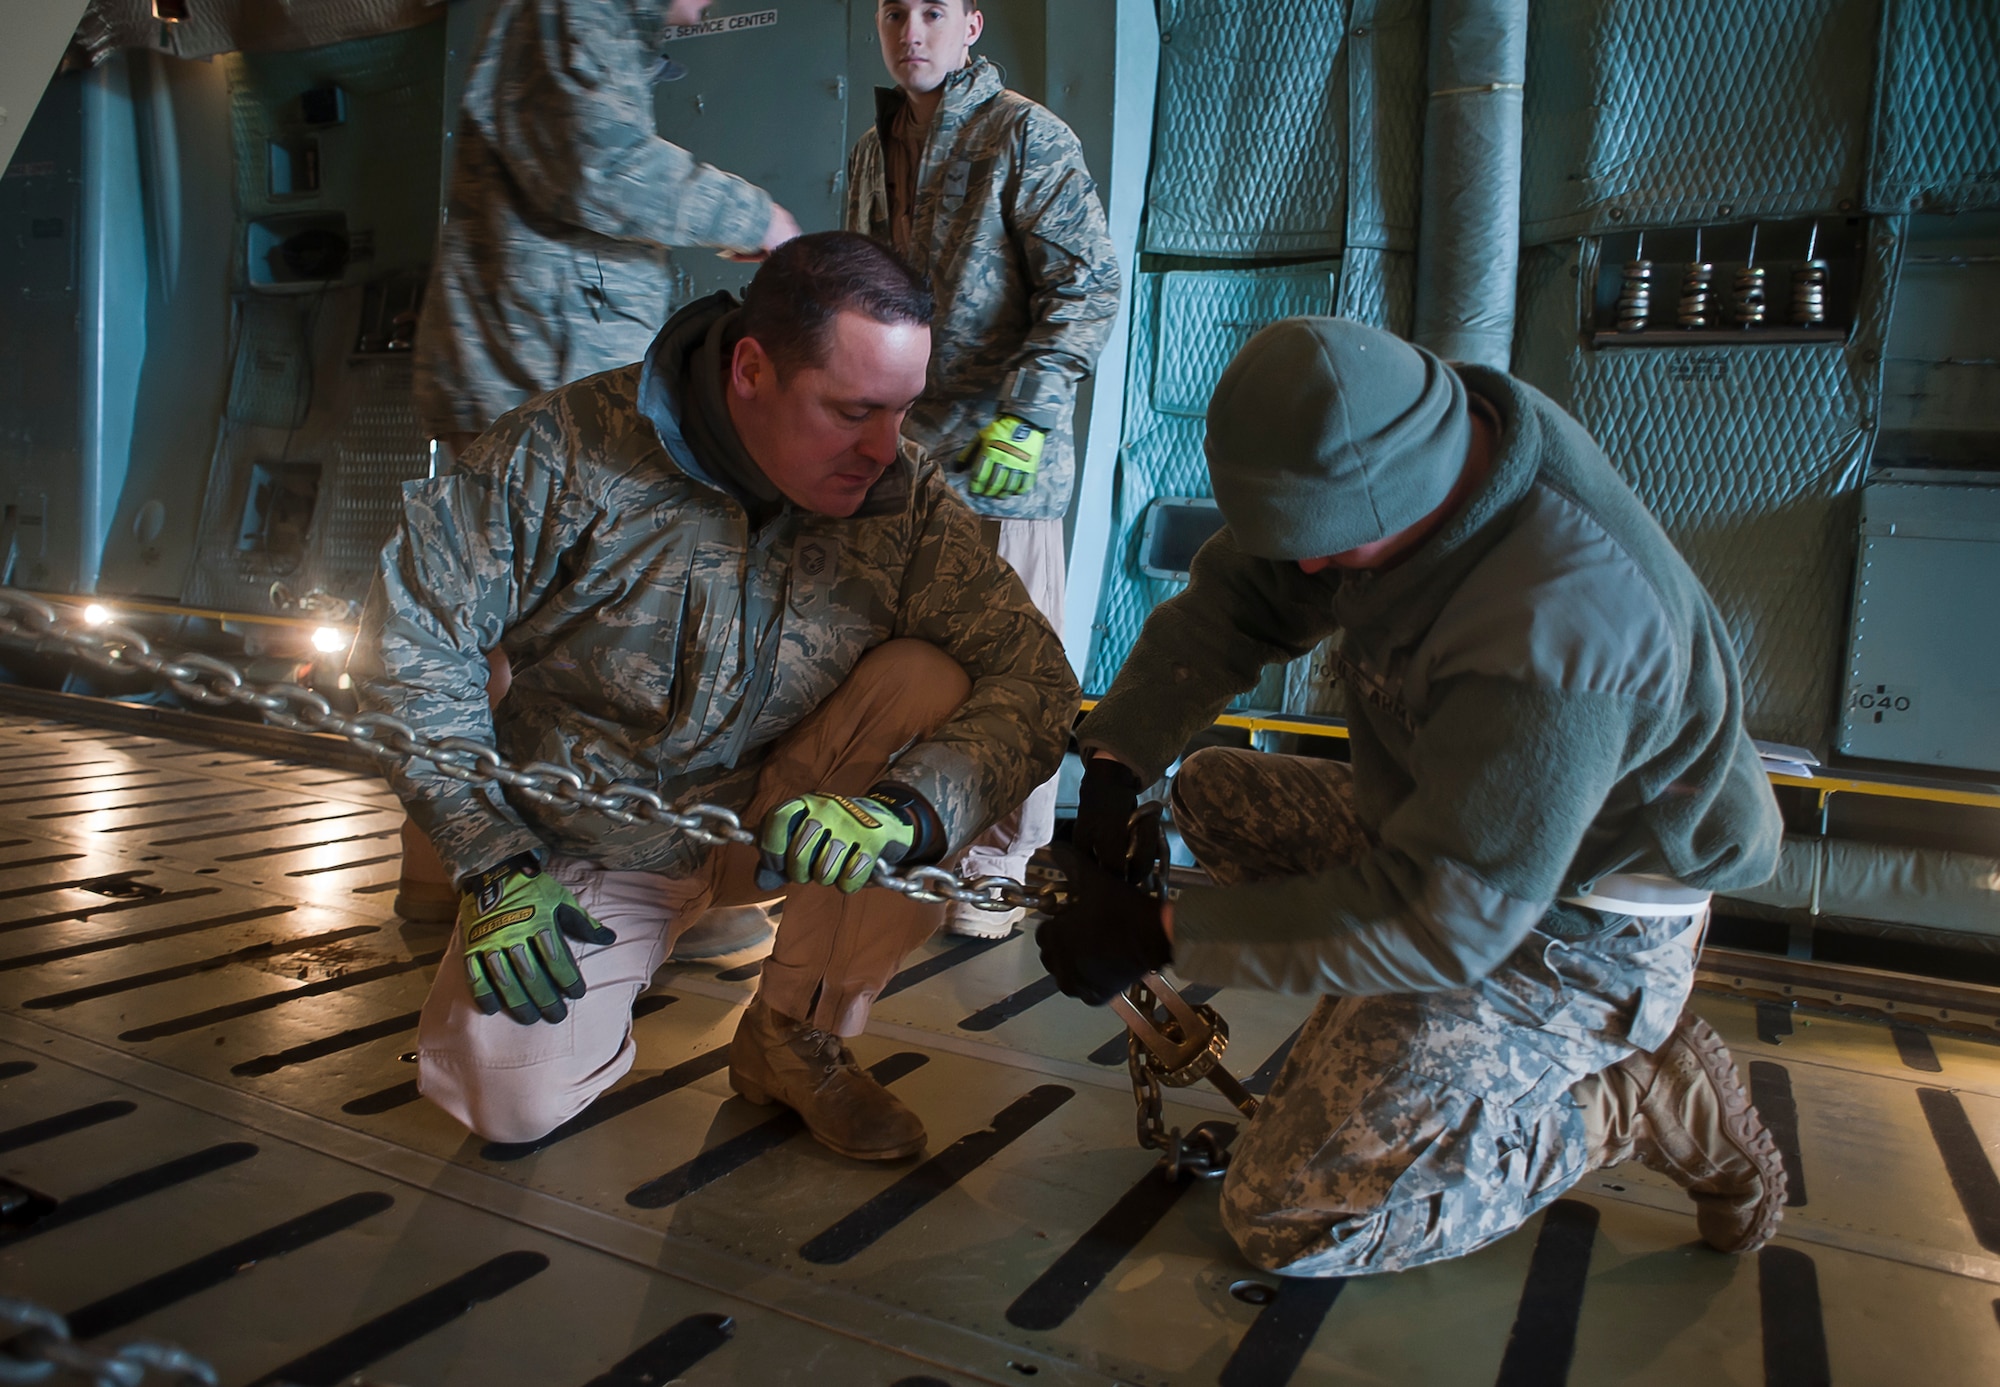 ALTUS AIR FORCE BASE, Okla. – Senior Master Sgt. Mark Snyder, 167th Airlift Wing, Martinsburg, W. Va. loadmaster assists Sgt. Daniel Hanke, Fort Sill Unit Movement Office augmentee, chain down an M983 Truck inside a 167th AW C-5 Galaxy on the Altus AFB flight line, Jan. 4, 2013. Members of the 97th Air Mobility Wing, Kentucky Air Guard Contingency Response Group, 31st Air Defense Artillery Army Brigade, Fort Sill, Okla. and 167th AW, joined forces to deploy batteries of Patriot-air-defense systems, more than two million pounds of equipment and about 300 personnel from 3-2 Air Defense Artillery Battalion to Turkey in support of the North Atlantic Treaty Organization. (U.S. Air Force photo by Airman 1st Class Levin Boland/ Released)